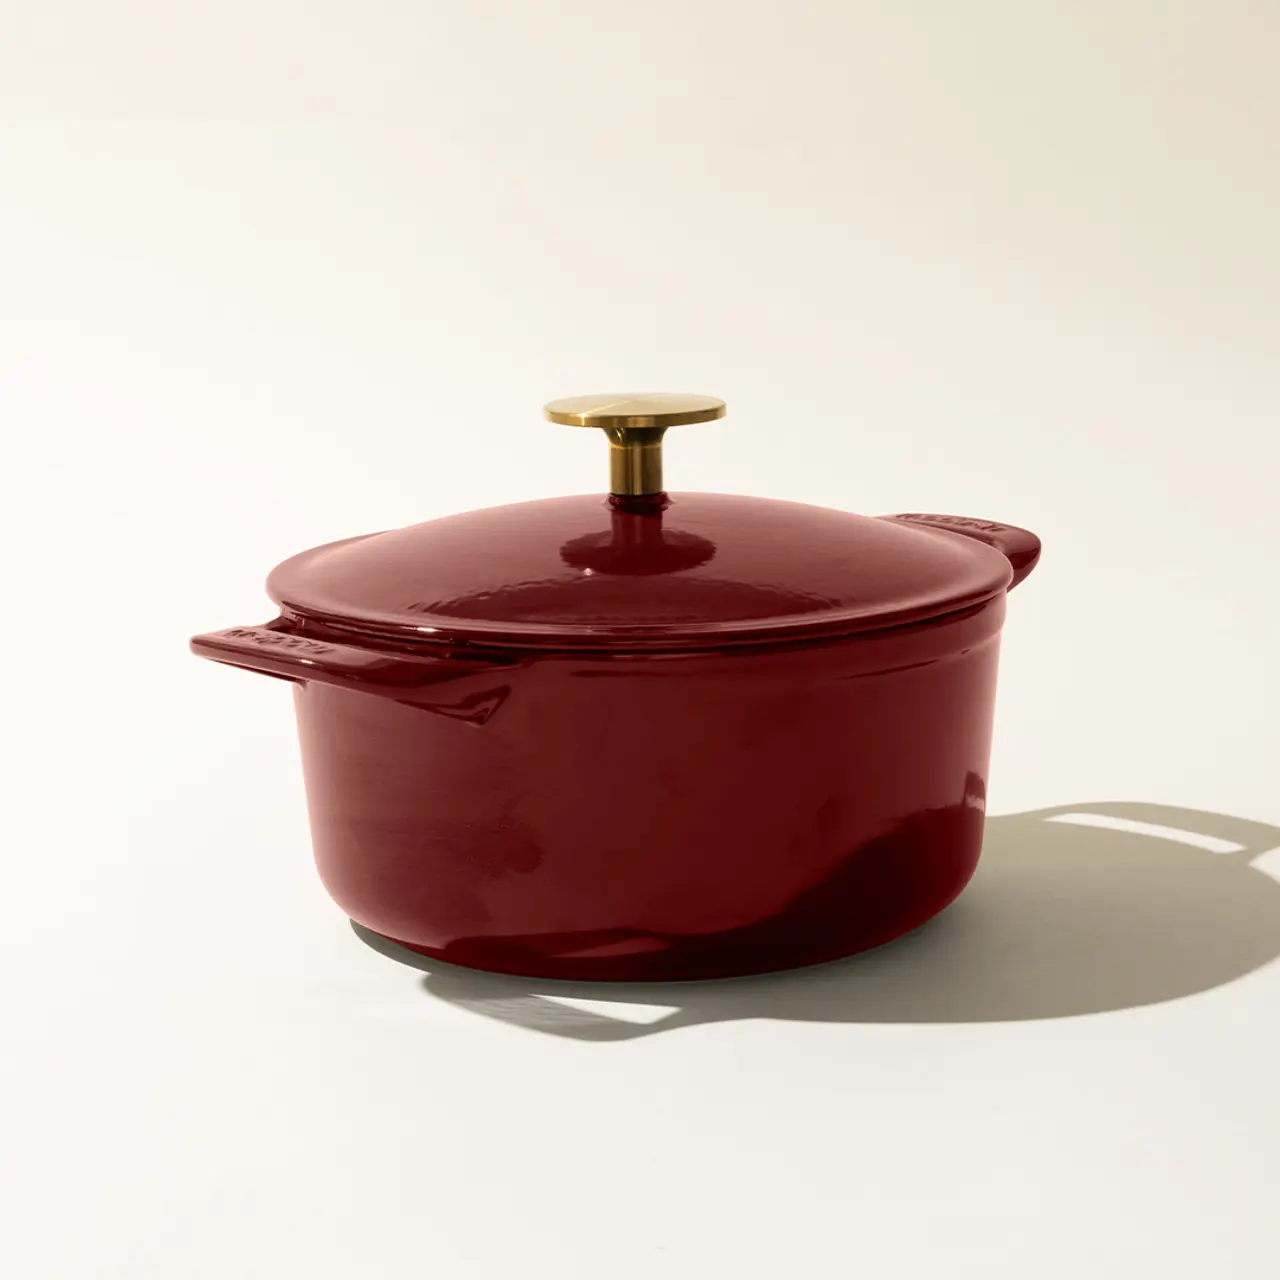 A red enameled cast iron Dutch oven with a lid and a gold-colored knob handle, on a neutral background with a distinct shadow to the right.